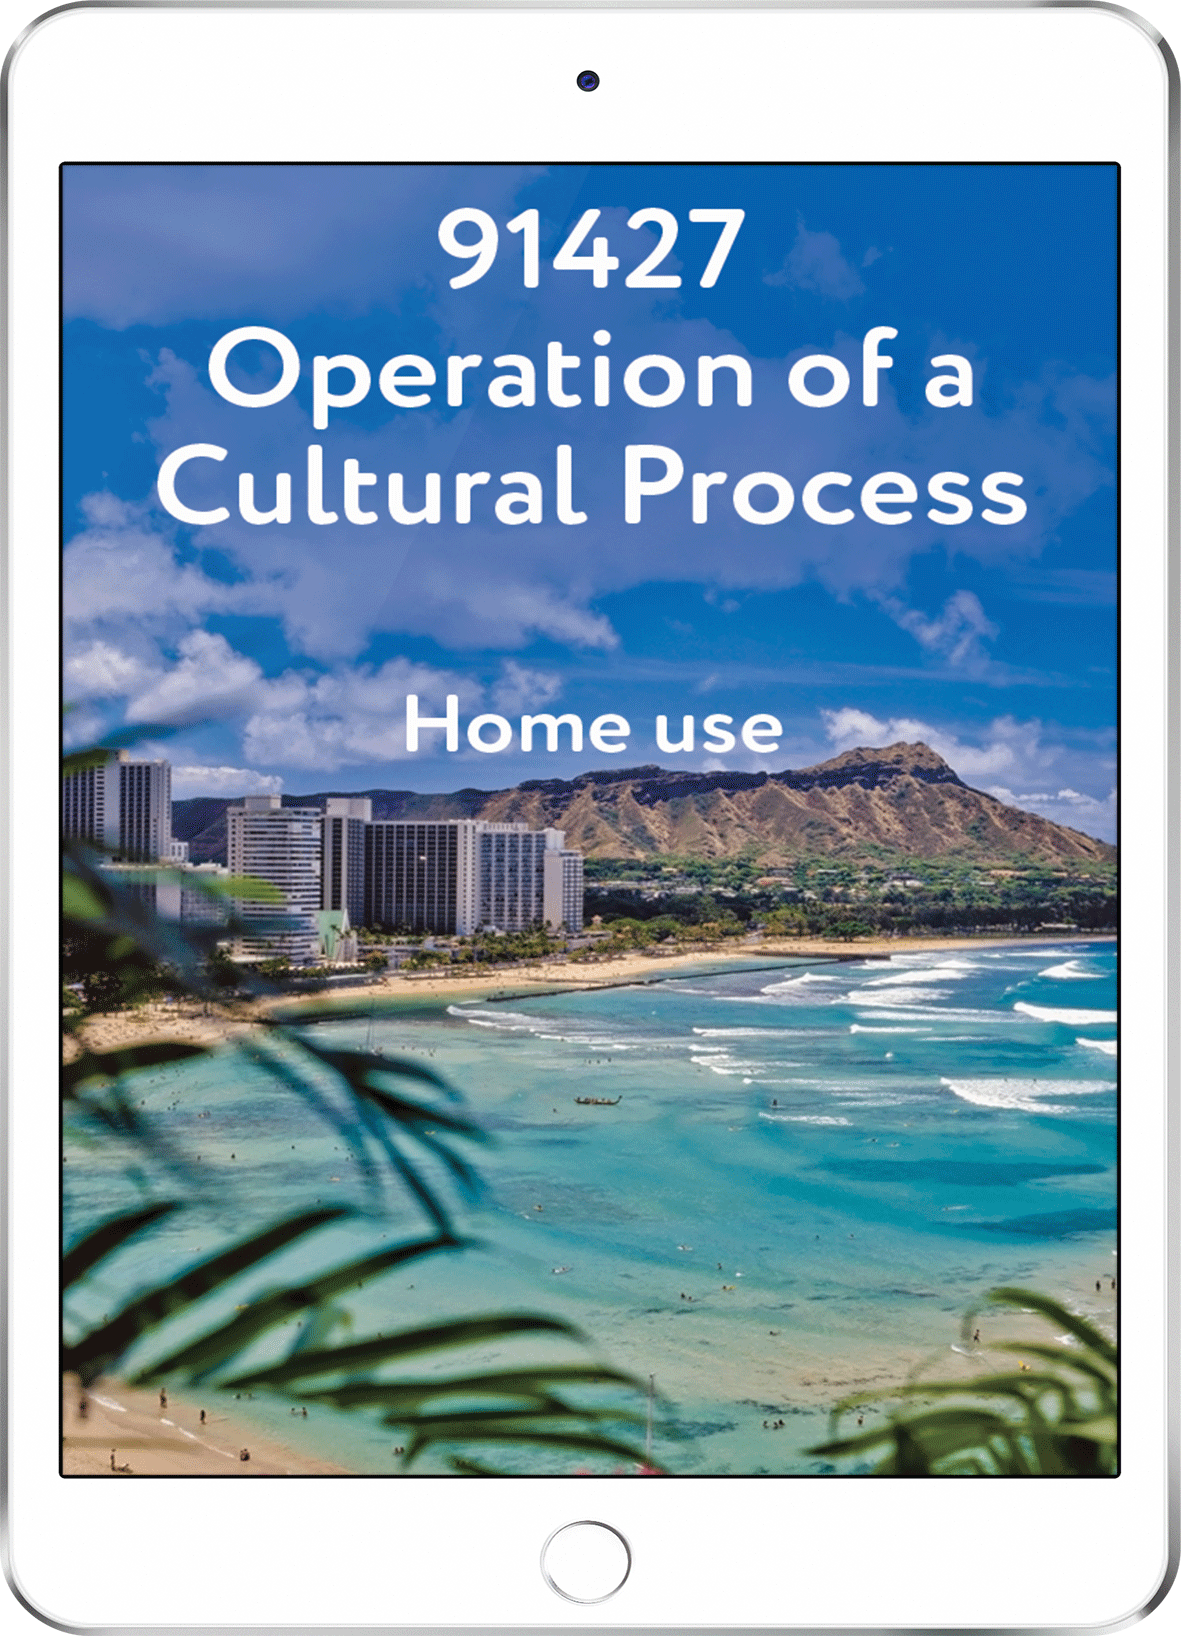 91427 Operation of a Cultural Process - Home Use